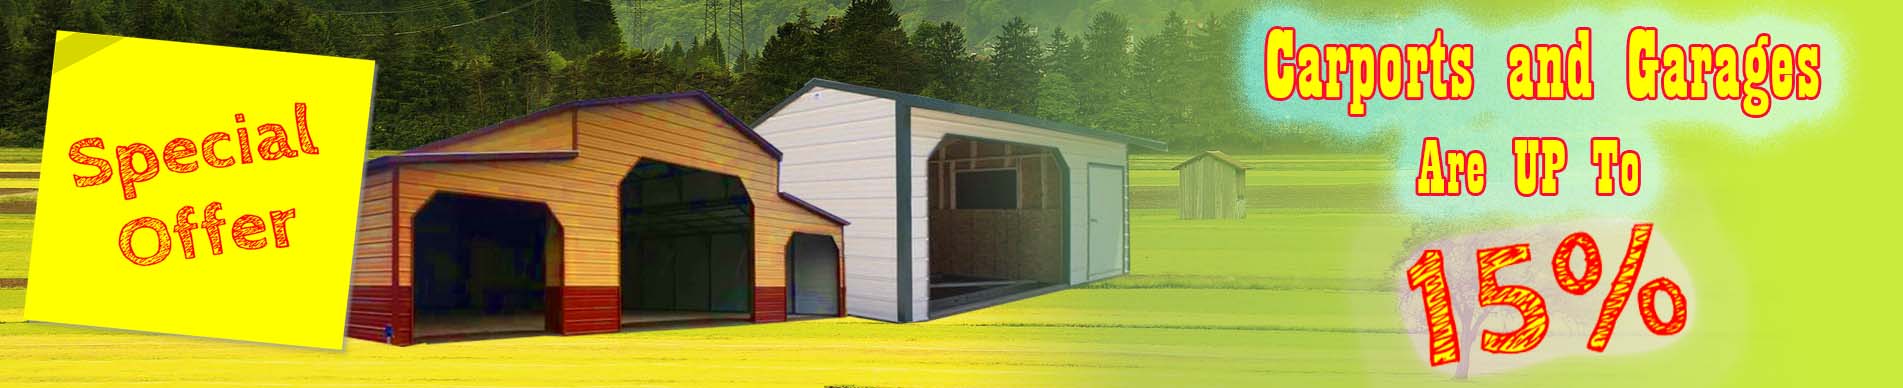 Special 15% OFF Carports and Garages 